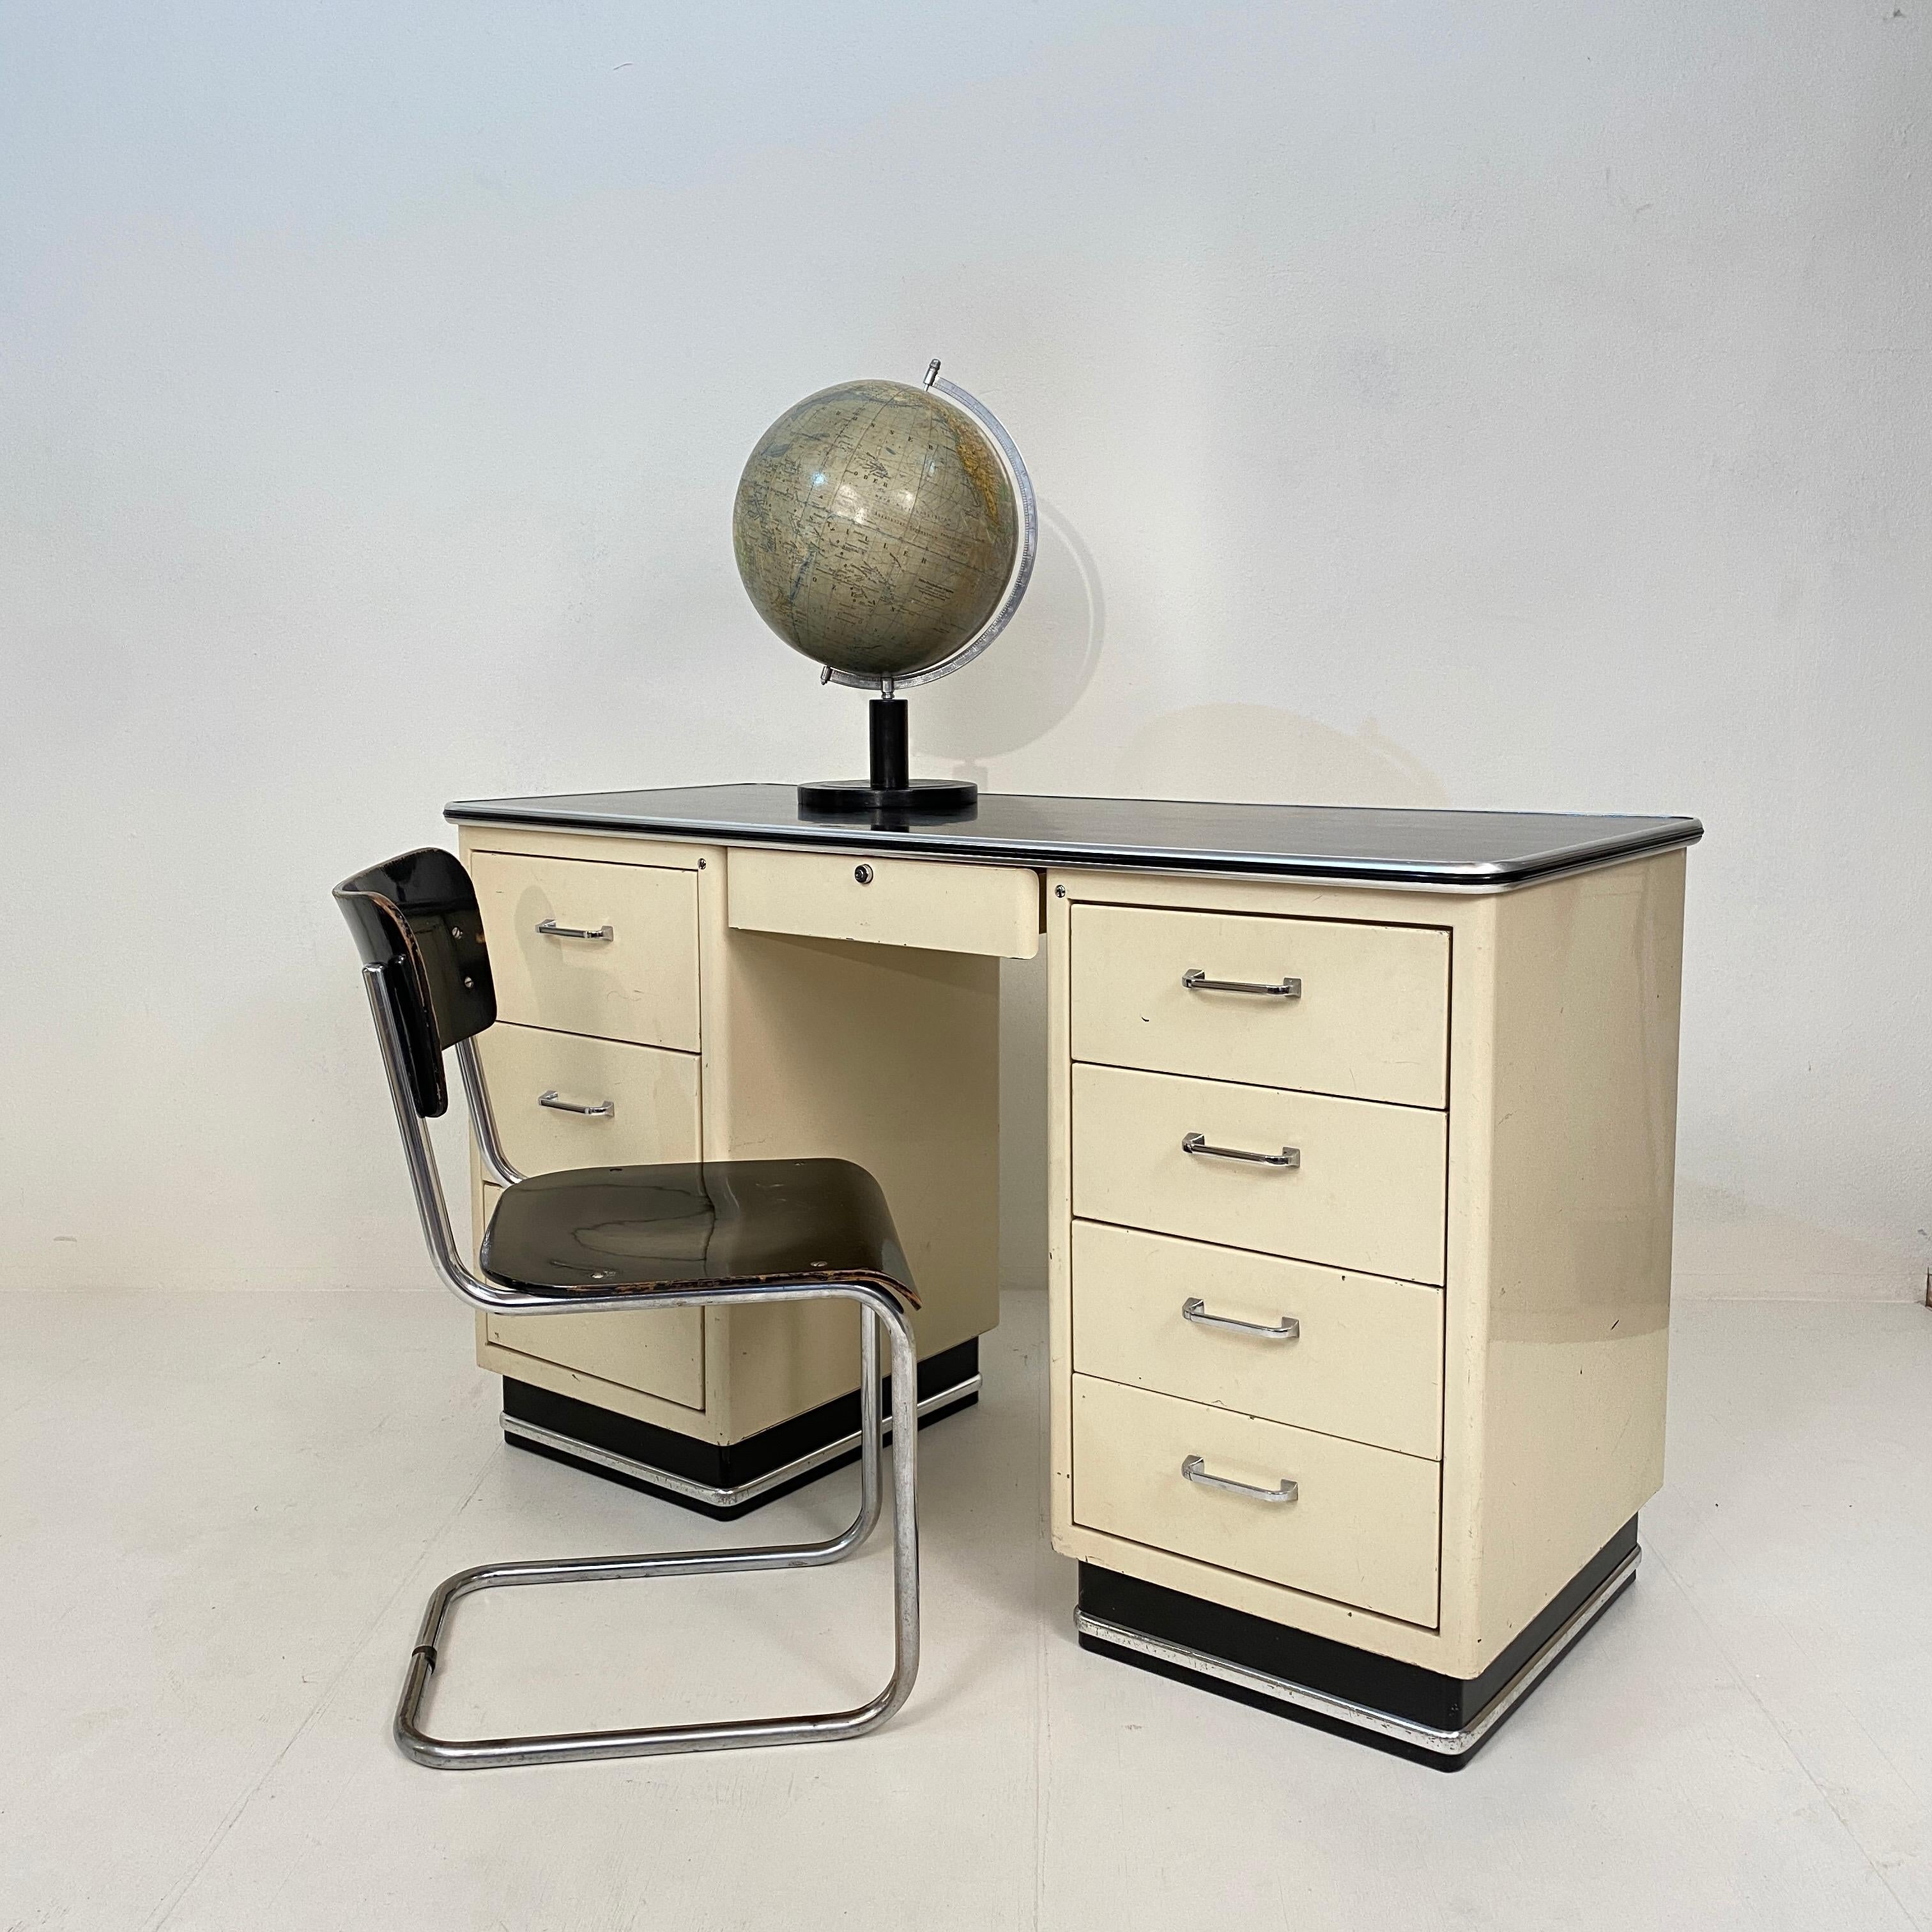 1930s German Bauhaus Desk Out of White Lacquered Metal and a Black Linoleum Top 2